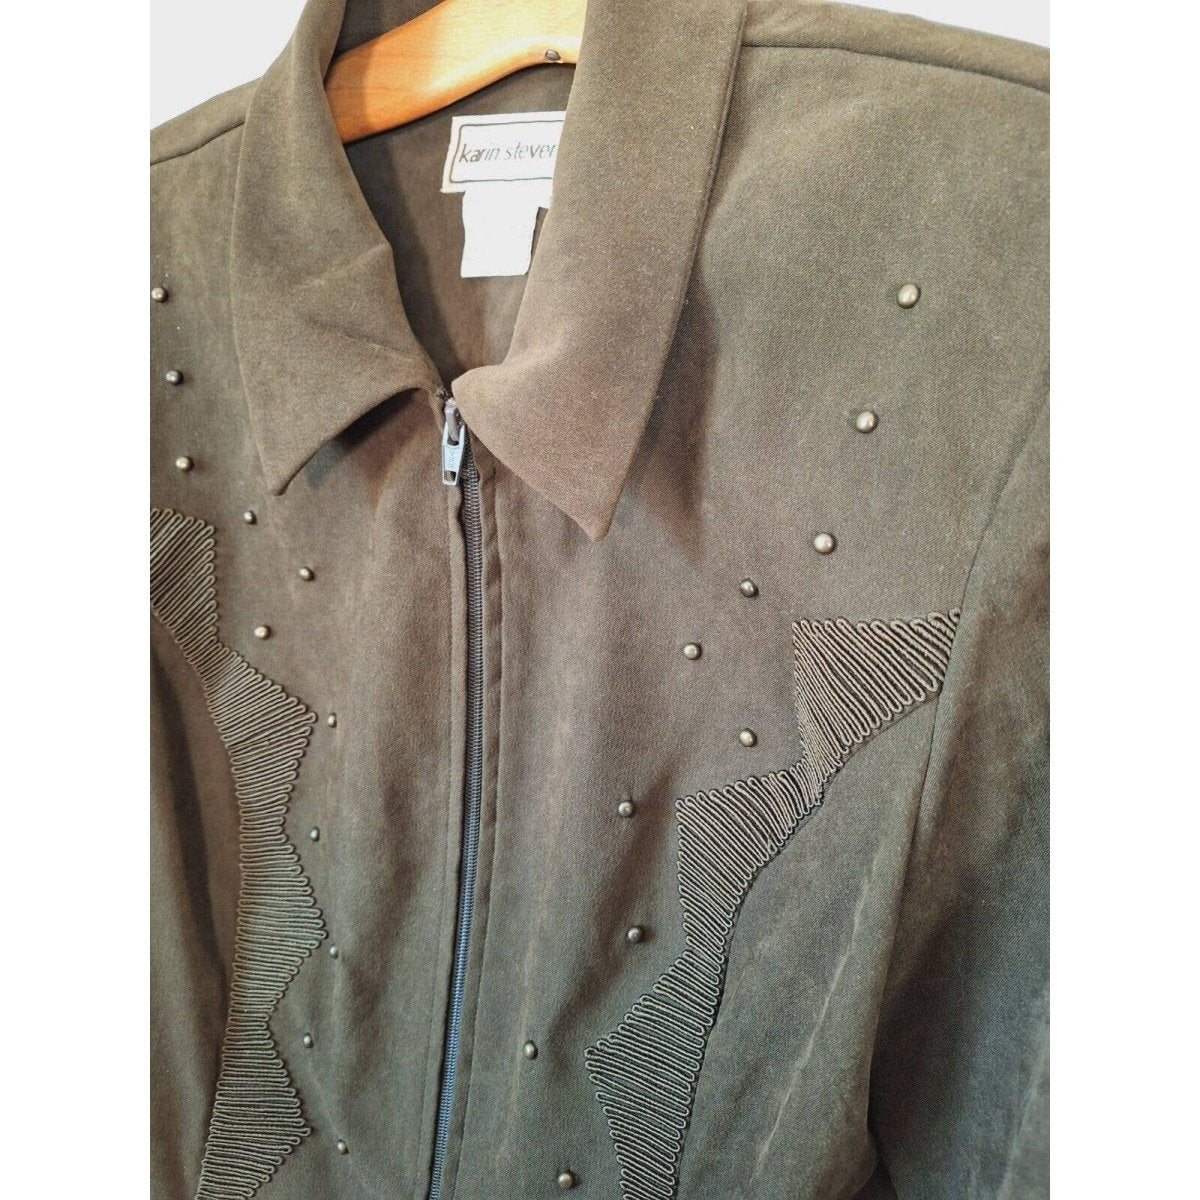 Vintage 80s Olive Green Zip Jacket Size Large - themallvintage The Mall Vintage